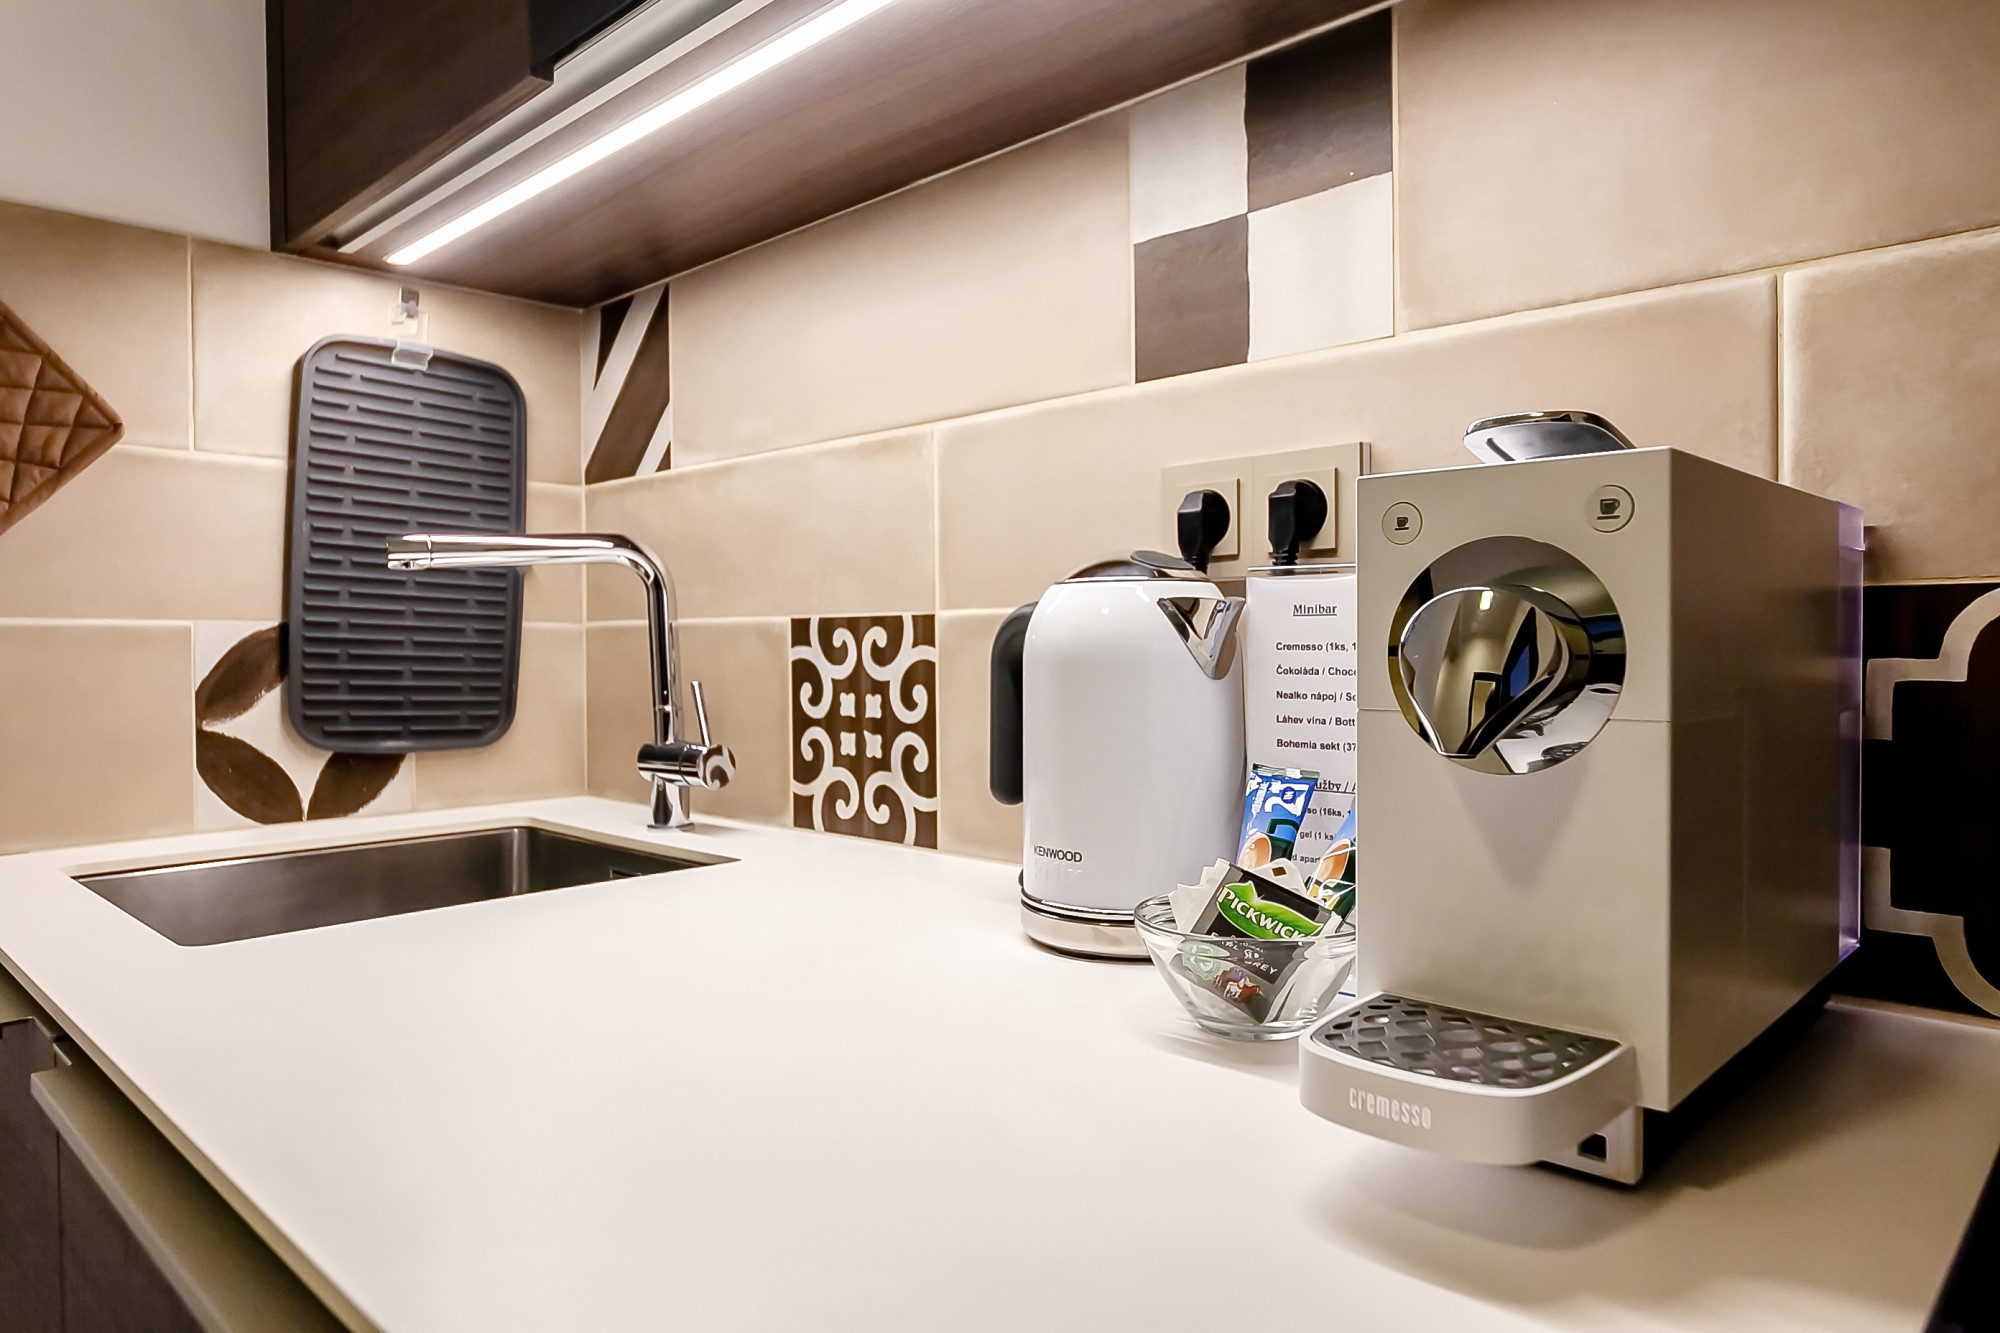 Fully equipped kitchen with sink, microwave, coffe maker, and toaster at Aparthotel Vinohradský dům Prague. Gallery.